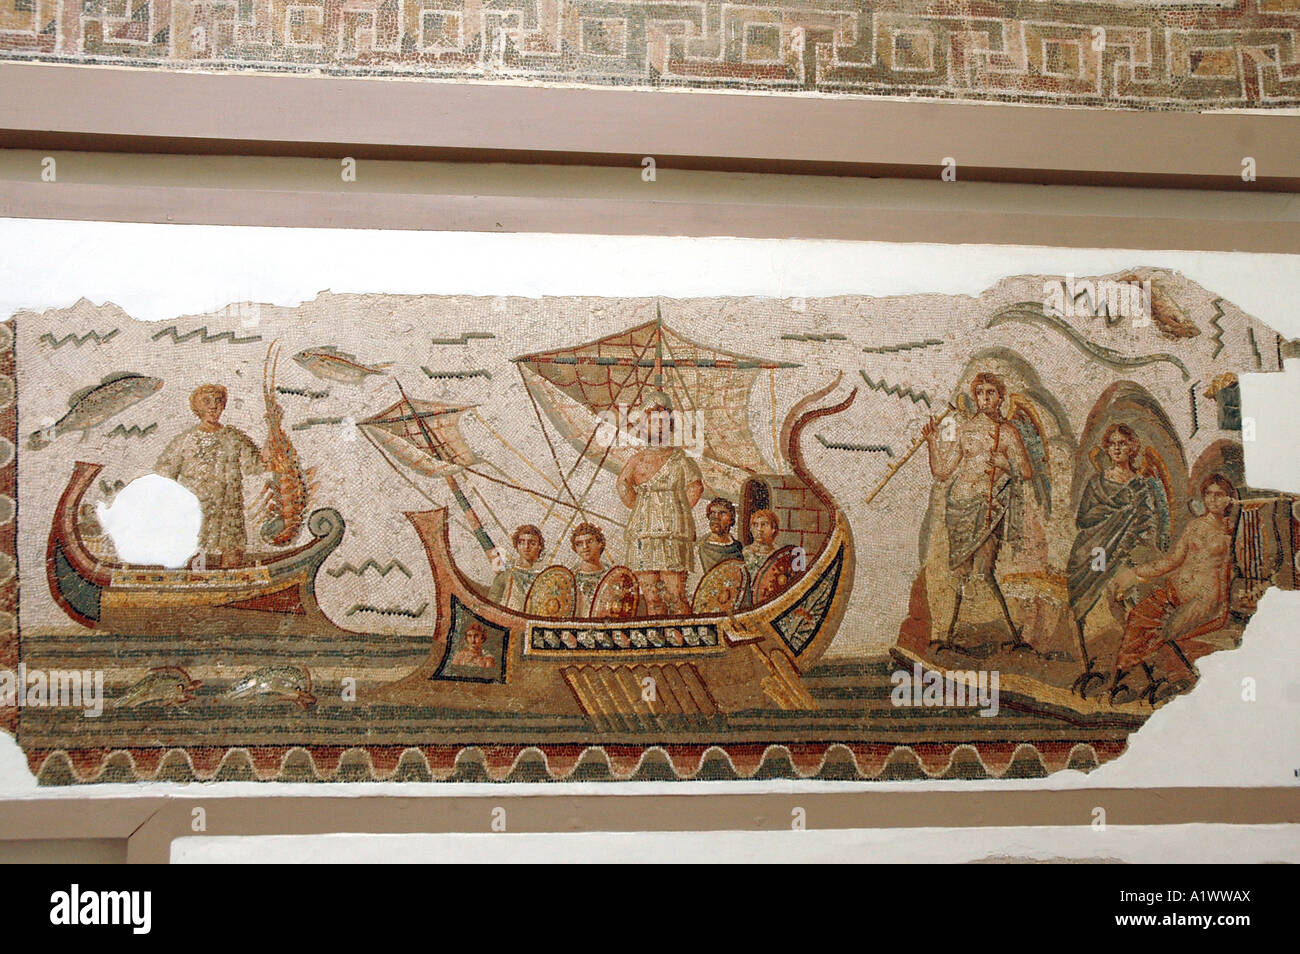 Mosaic scene from Homer's Odyssey, Ulysses meeting with sirens in The Bardo museum in Tunis, capital of Tunisia Stock Photo